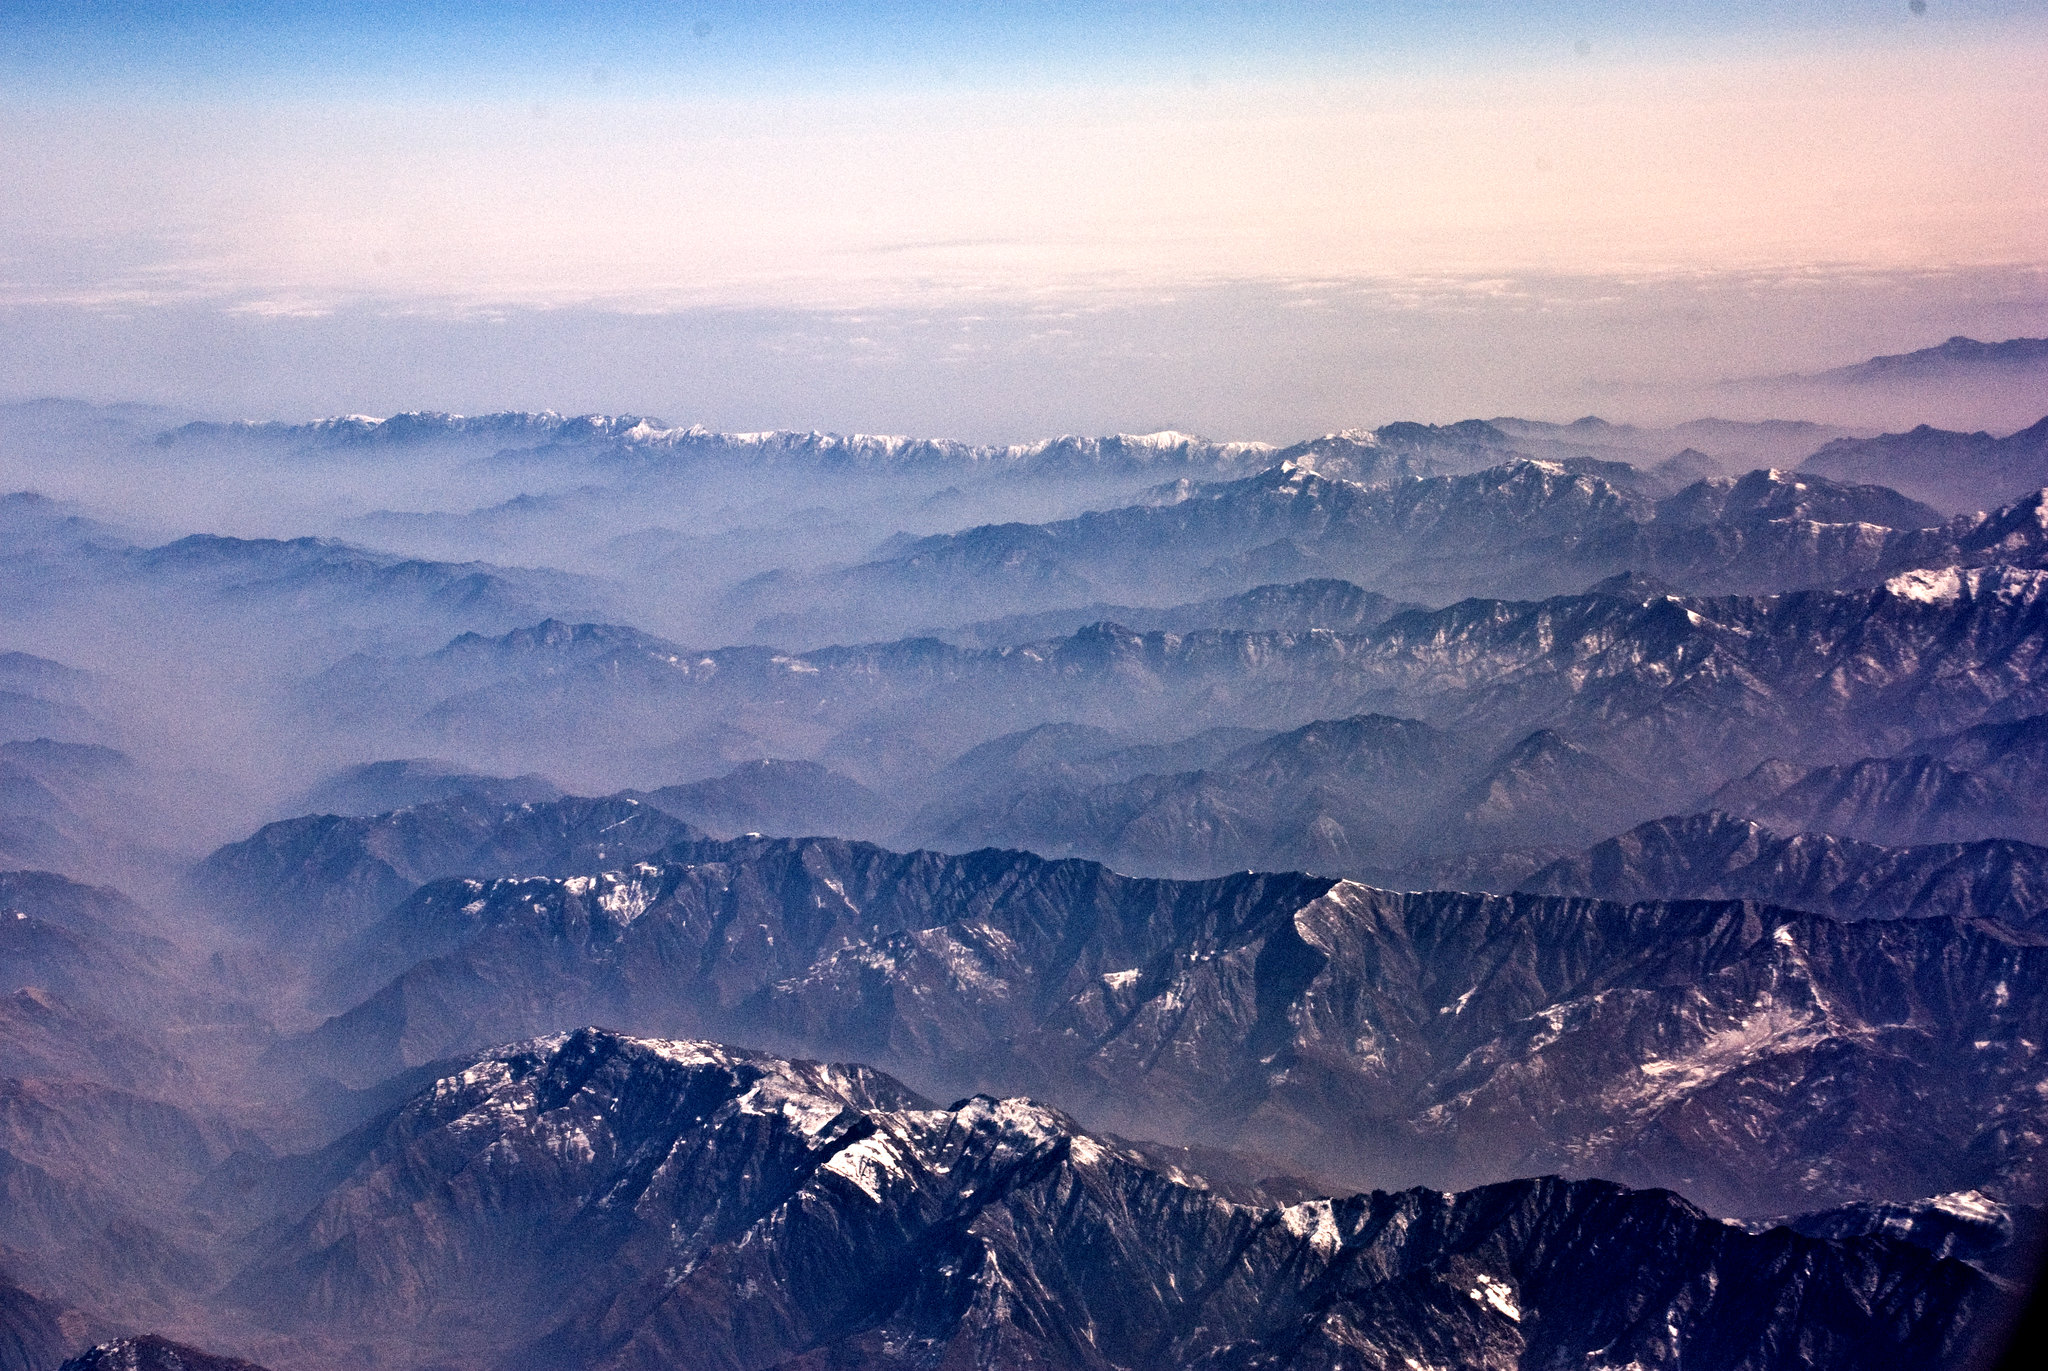 Snow-capped mountains in Gansu province, China, photographed from a plane in 2008